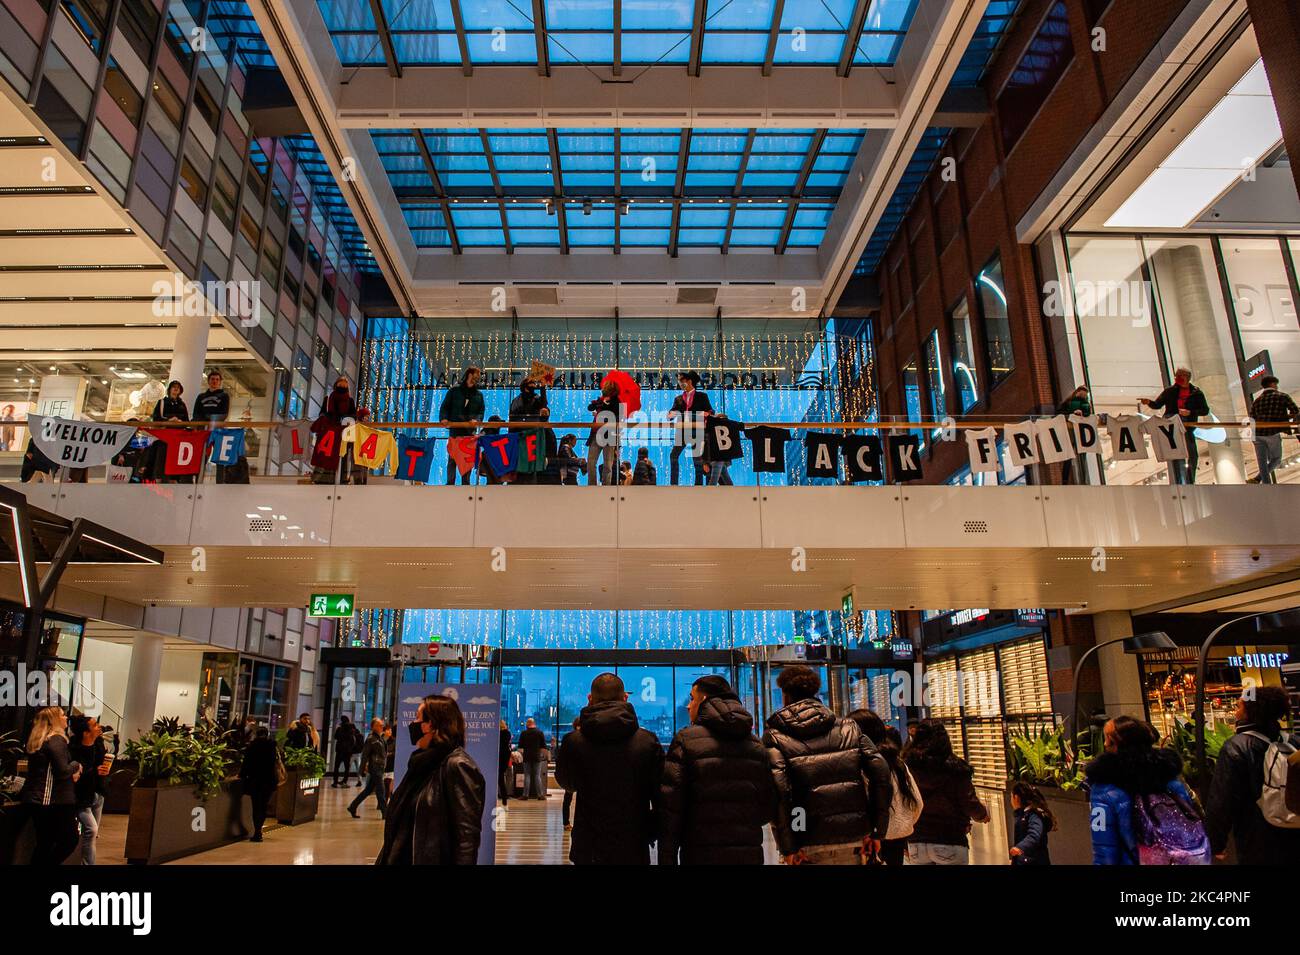 A few climate activists hold a banner against Black Friday inside the shopping mall before security guards removed it, during the 'Circus protest' against Black Friday, in Utrecht, on November 27th, 2020. (Photo by Romy Arroyo Fernandez/NurPhoto) Stock Photo